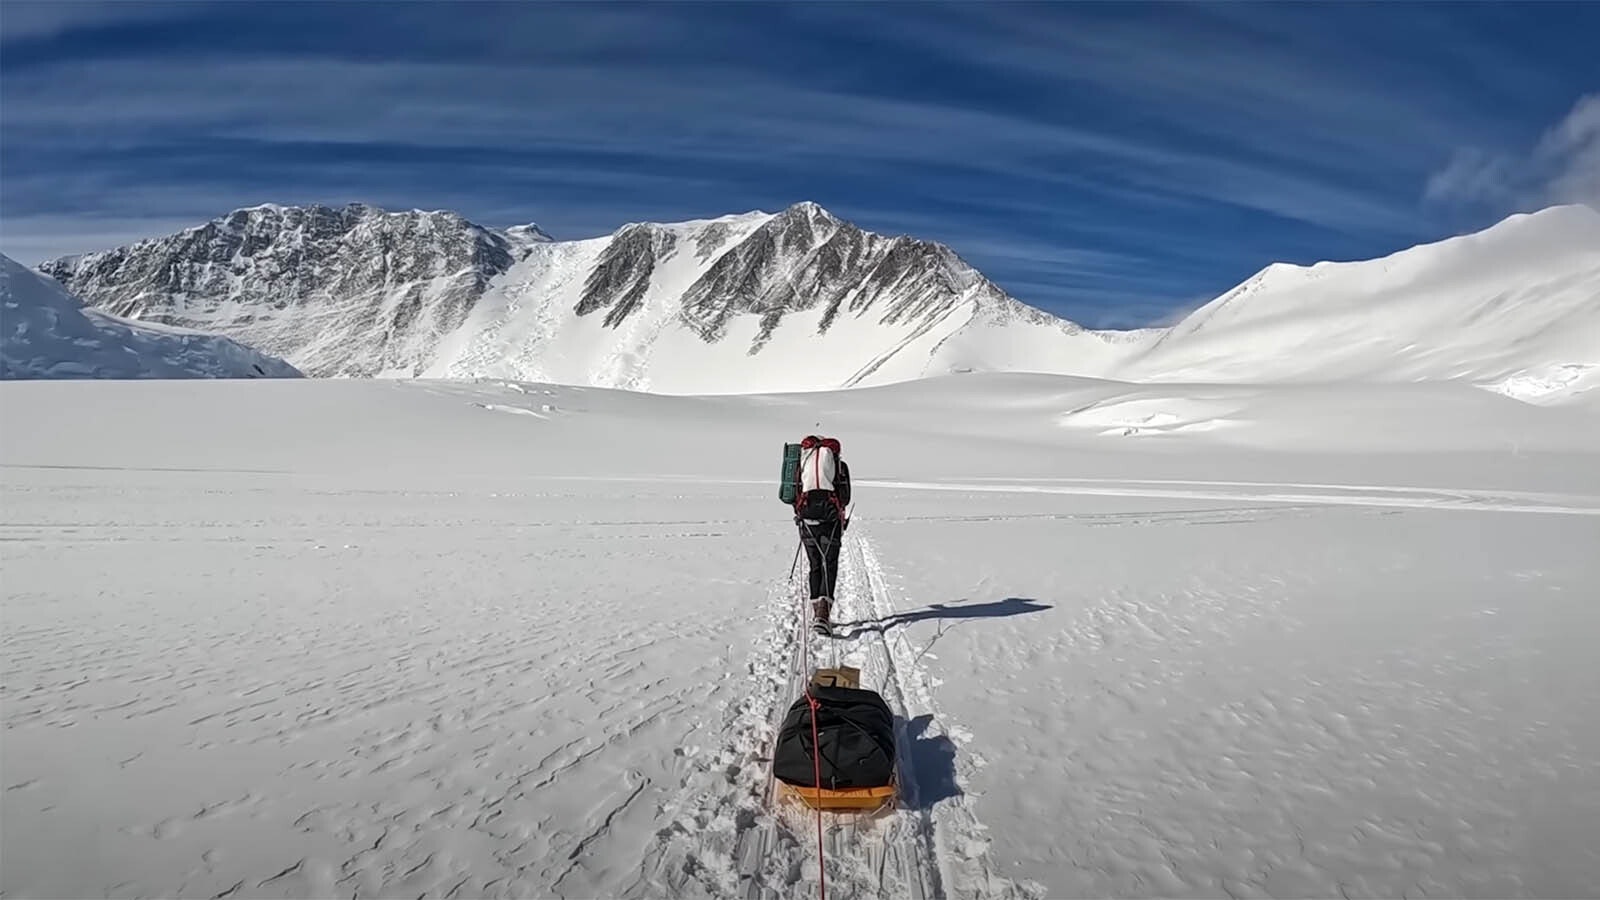 Getting to the summit of Mount Vinson requires climbing teams to pack and pull their gear with them along the way.